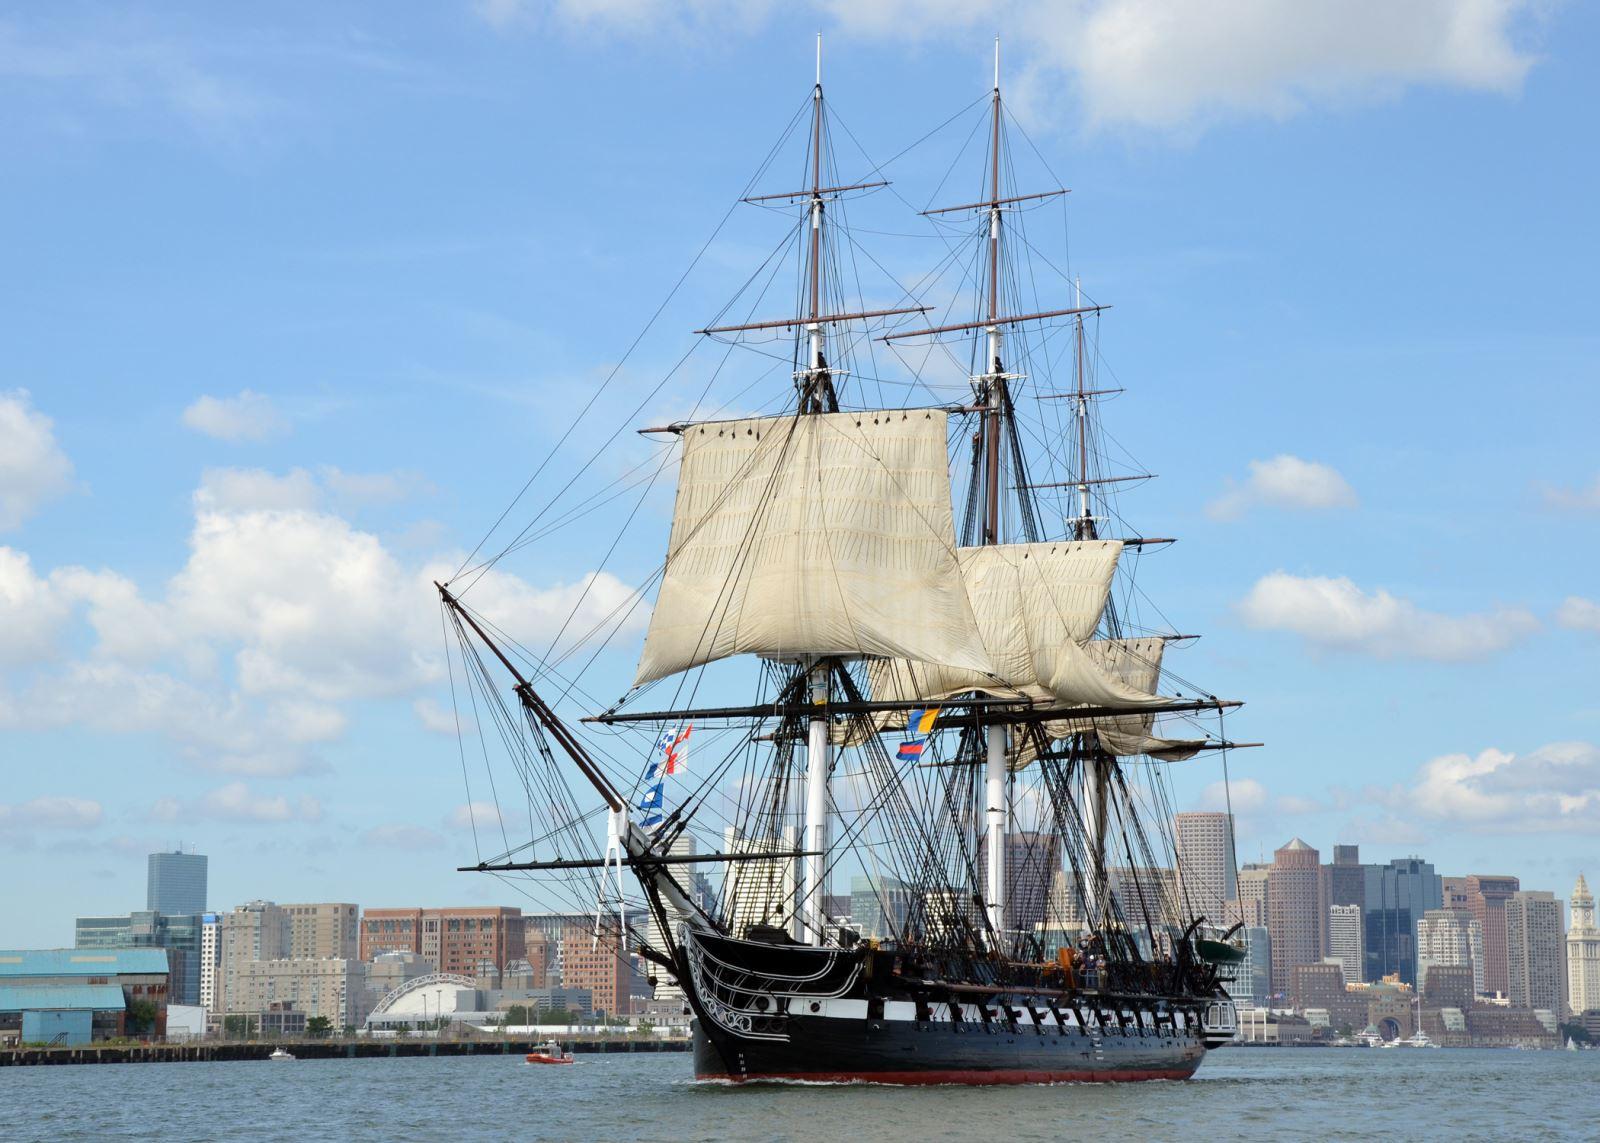 USS Constitution, The oldest commissioned naval vessel still afloat